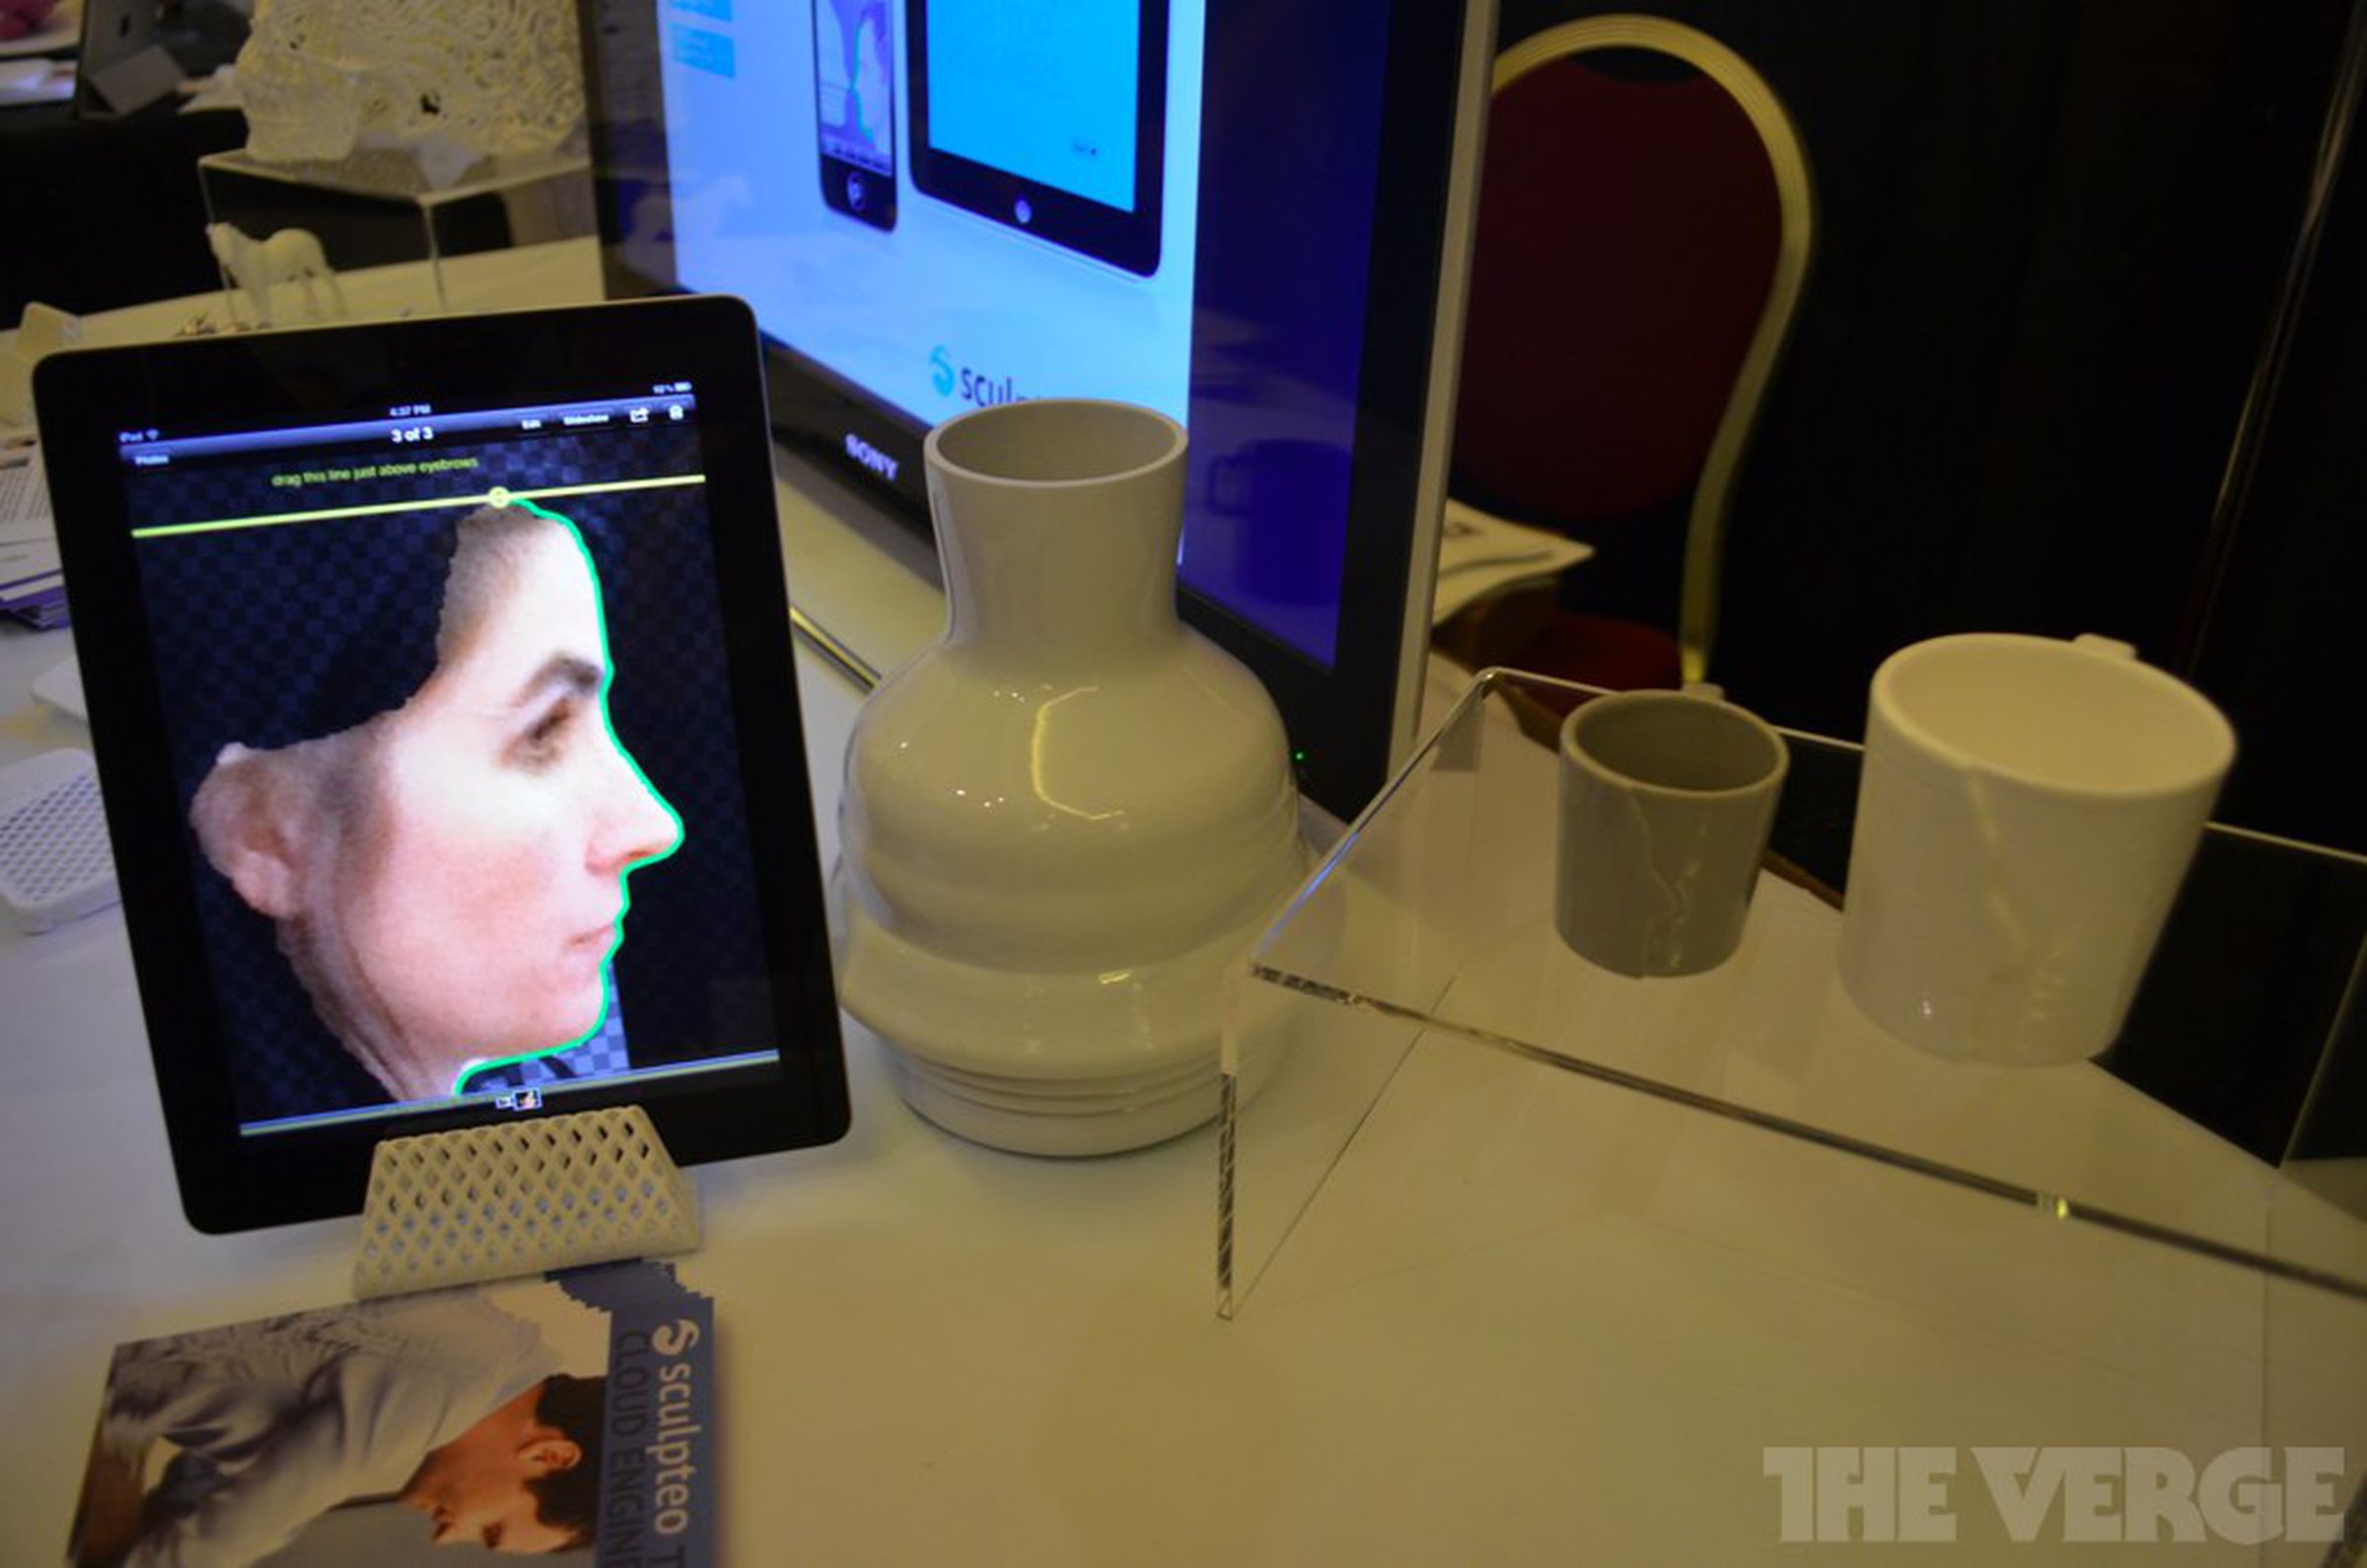 Sculpteo iOS app and custom printed objects hands-on pictures